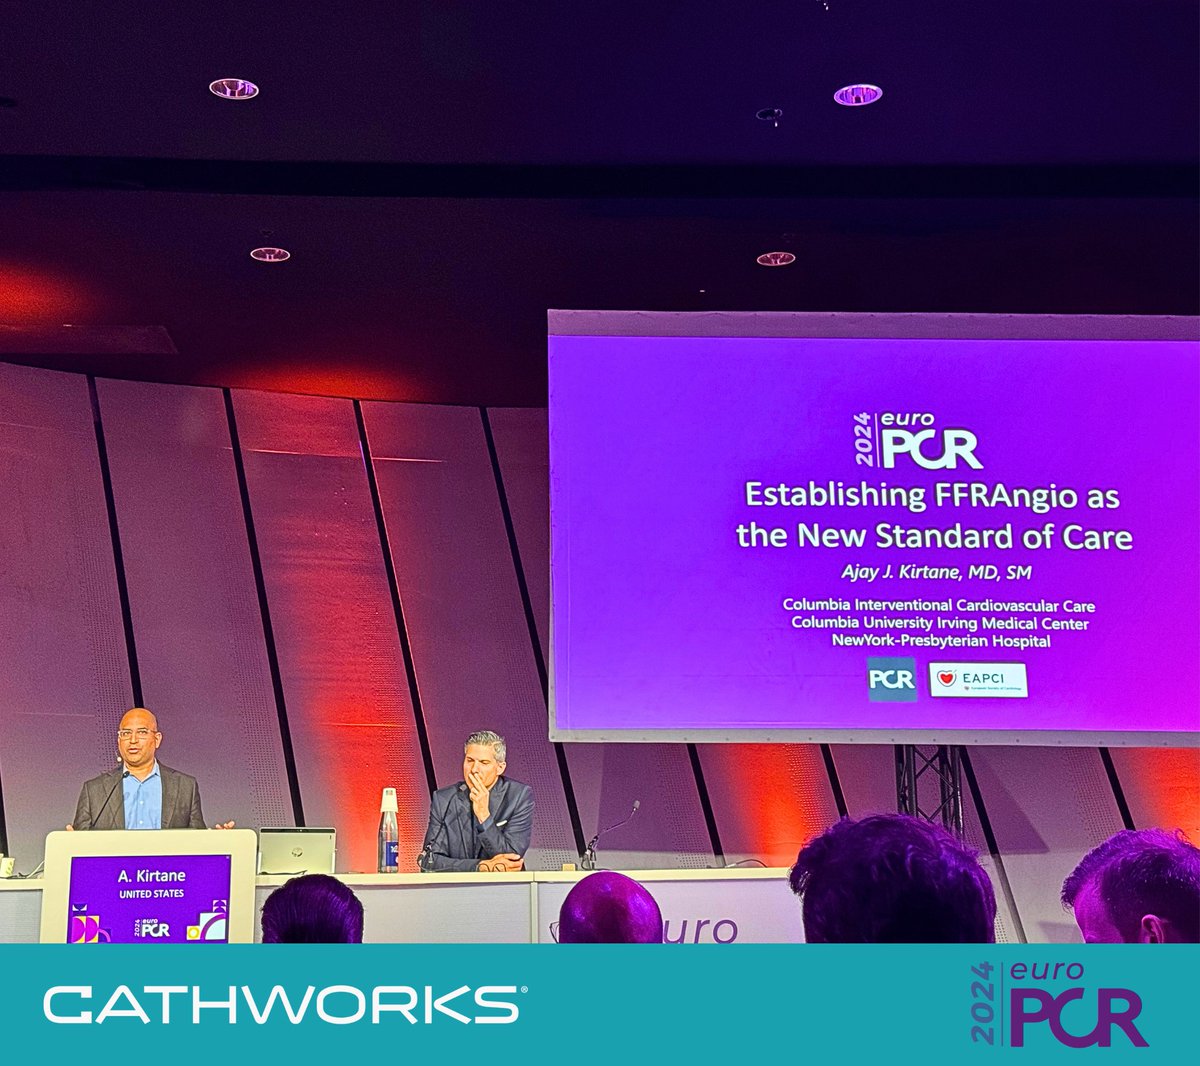 Full-house! Today’s #EuroPCR sponsored symposium with @MedtronicCRDN was standing-room only, with physicians eager to hear from the world-class panel of experts. Congratulations to Dr. @rallamee, Dr. Ajay Kirtane, Dr. @SFournierMD, Dr. @JuanFIglesias1, and Dr. @ColletCarlos for